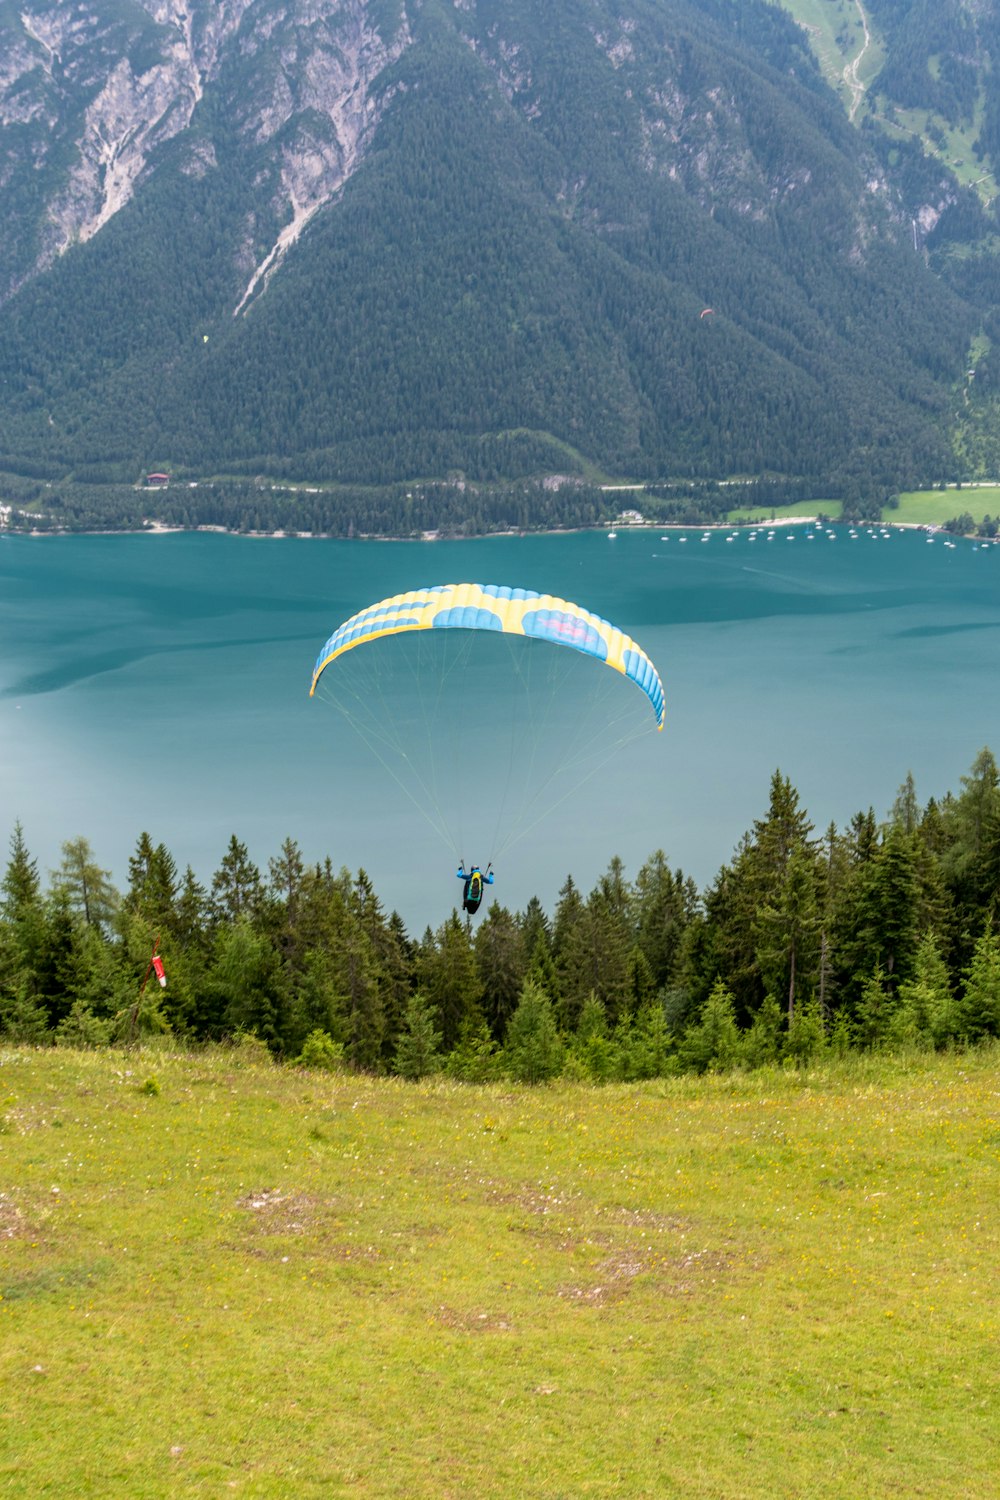 person riding parachute over green trees and mountain during daytime